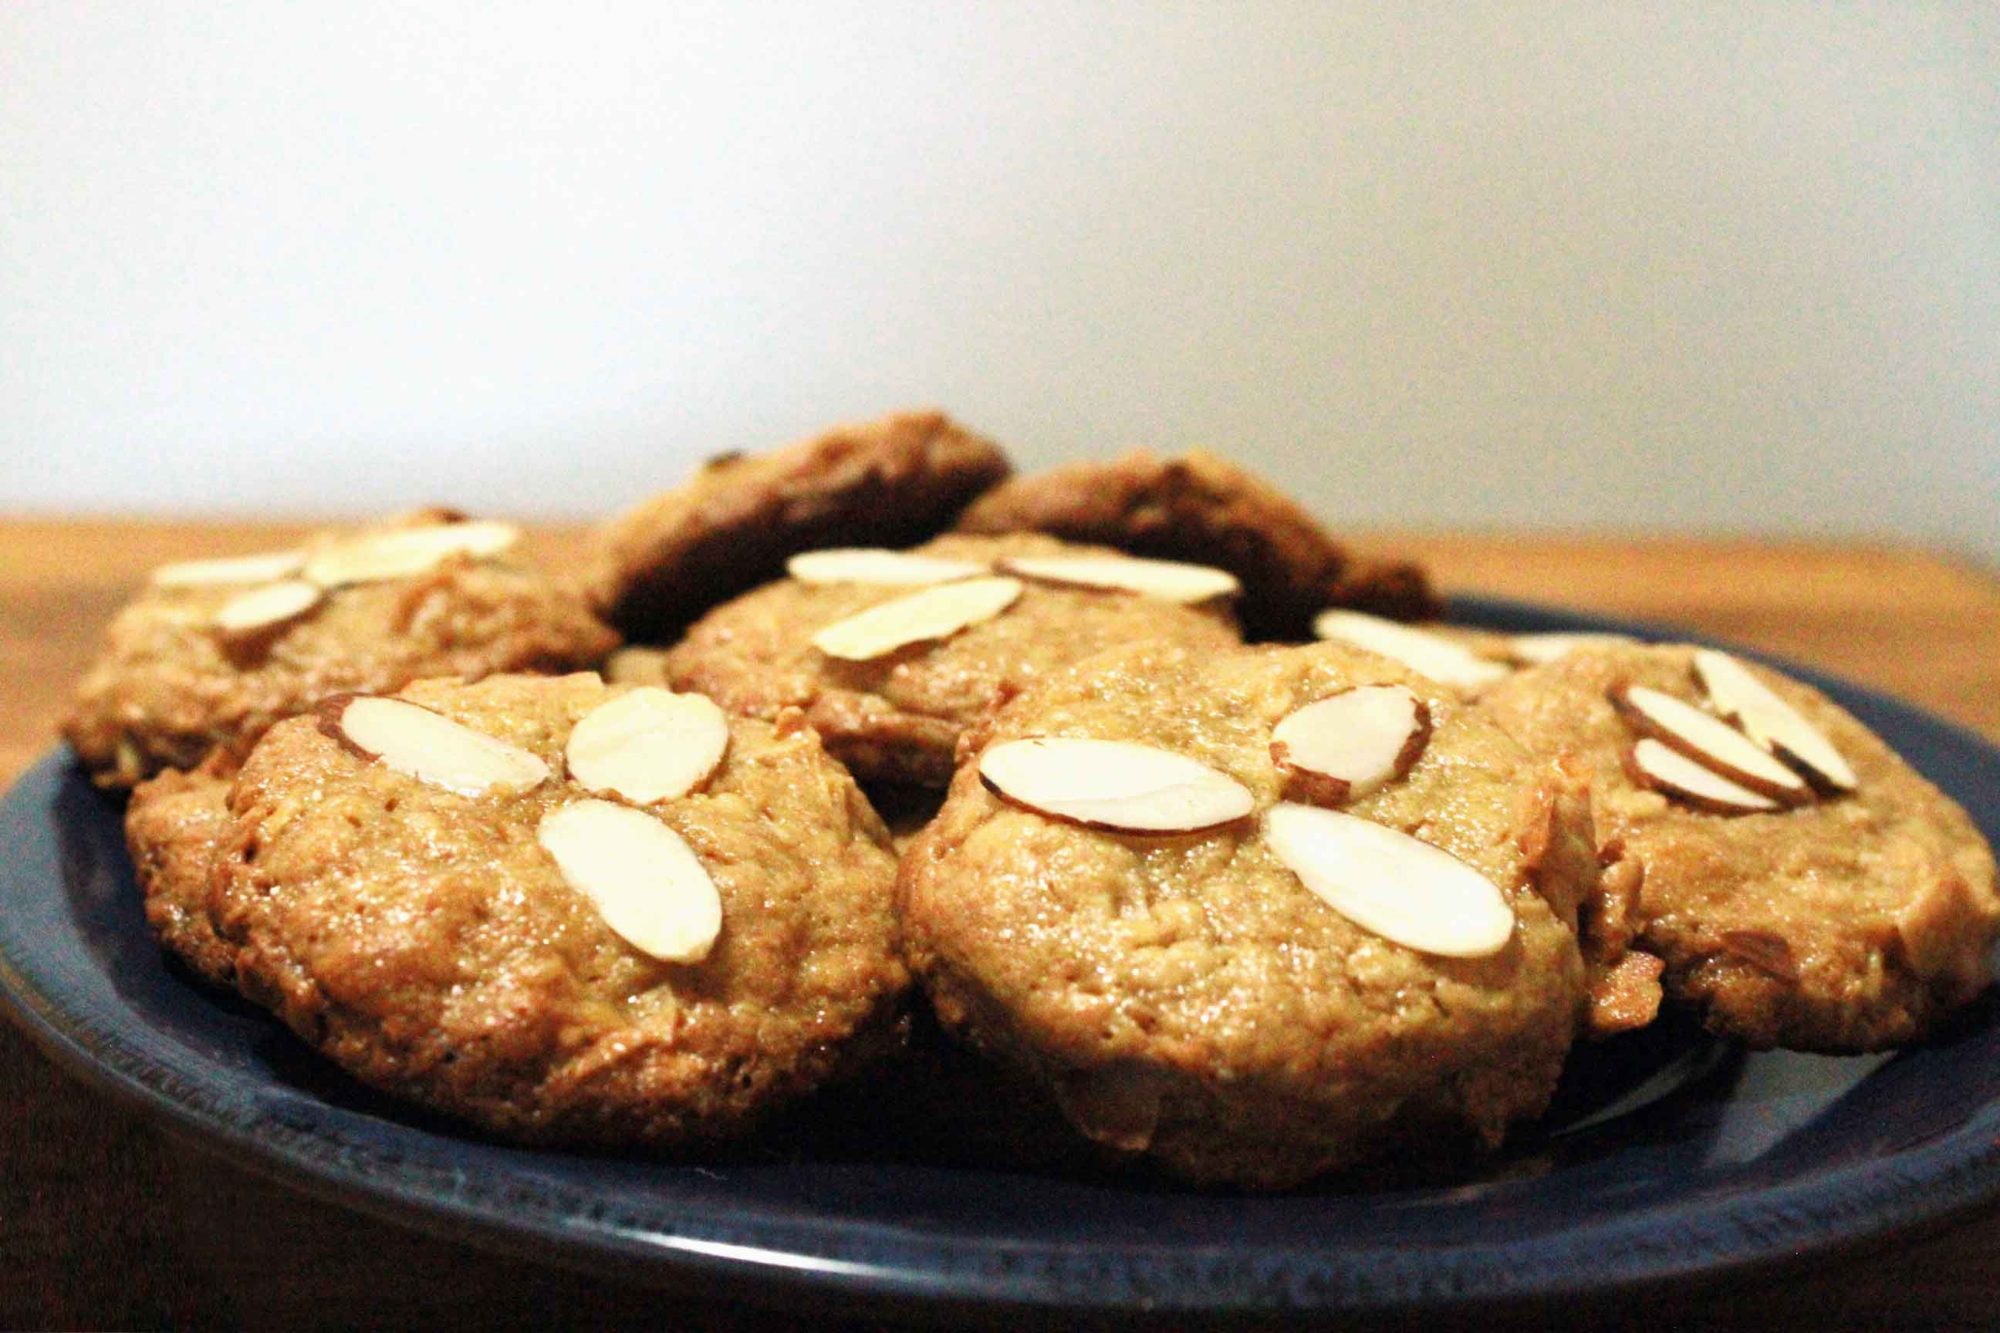 Gluten free chewy coconut oat cookies made with Montana Gluten Free All Purpose Baking Mix